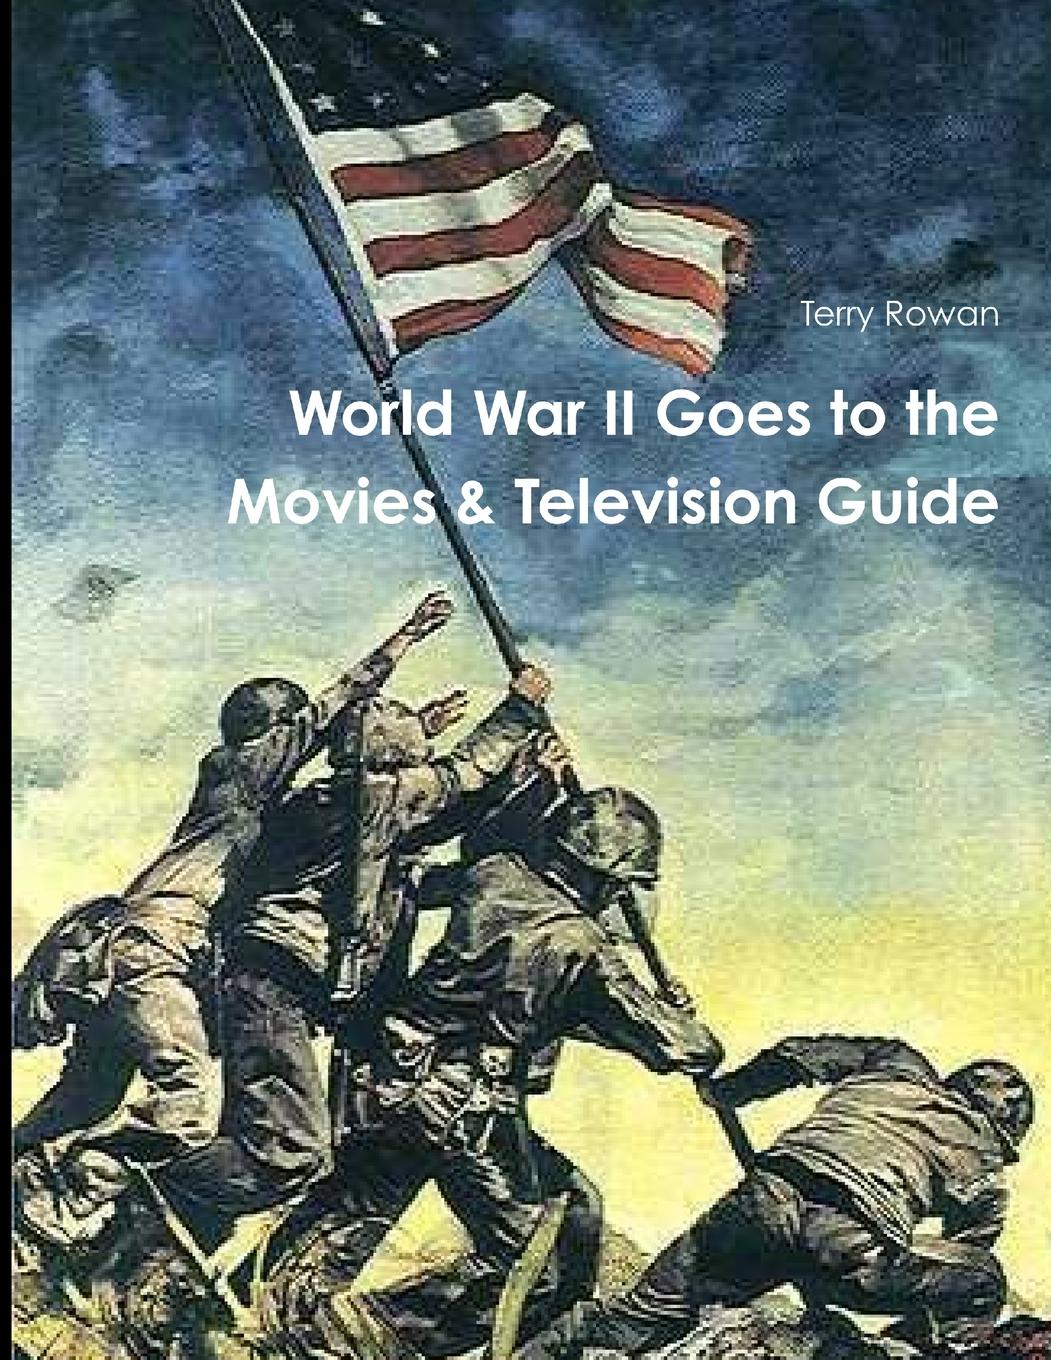 WOrld War II Goes to the Movies & Television Guide - Rowan, Terry